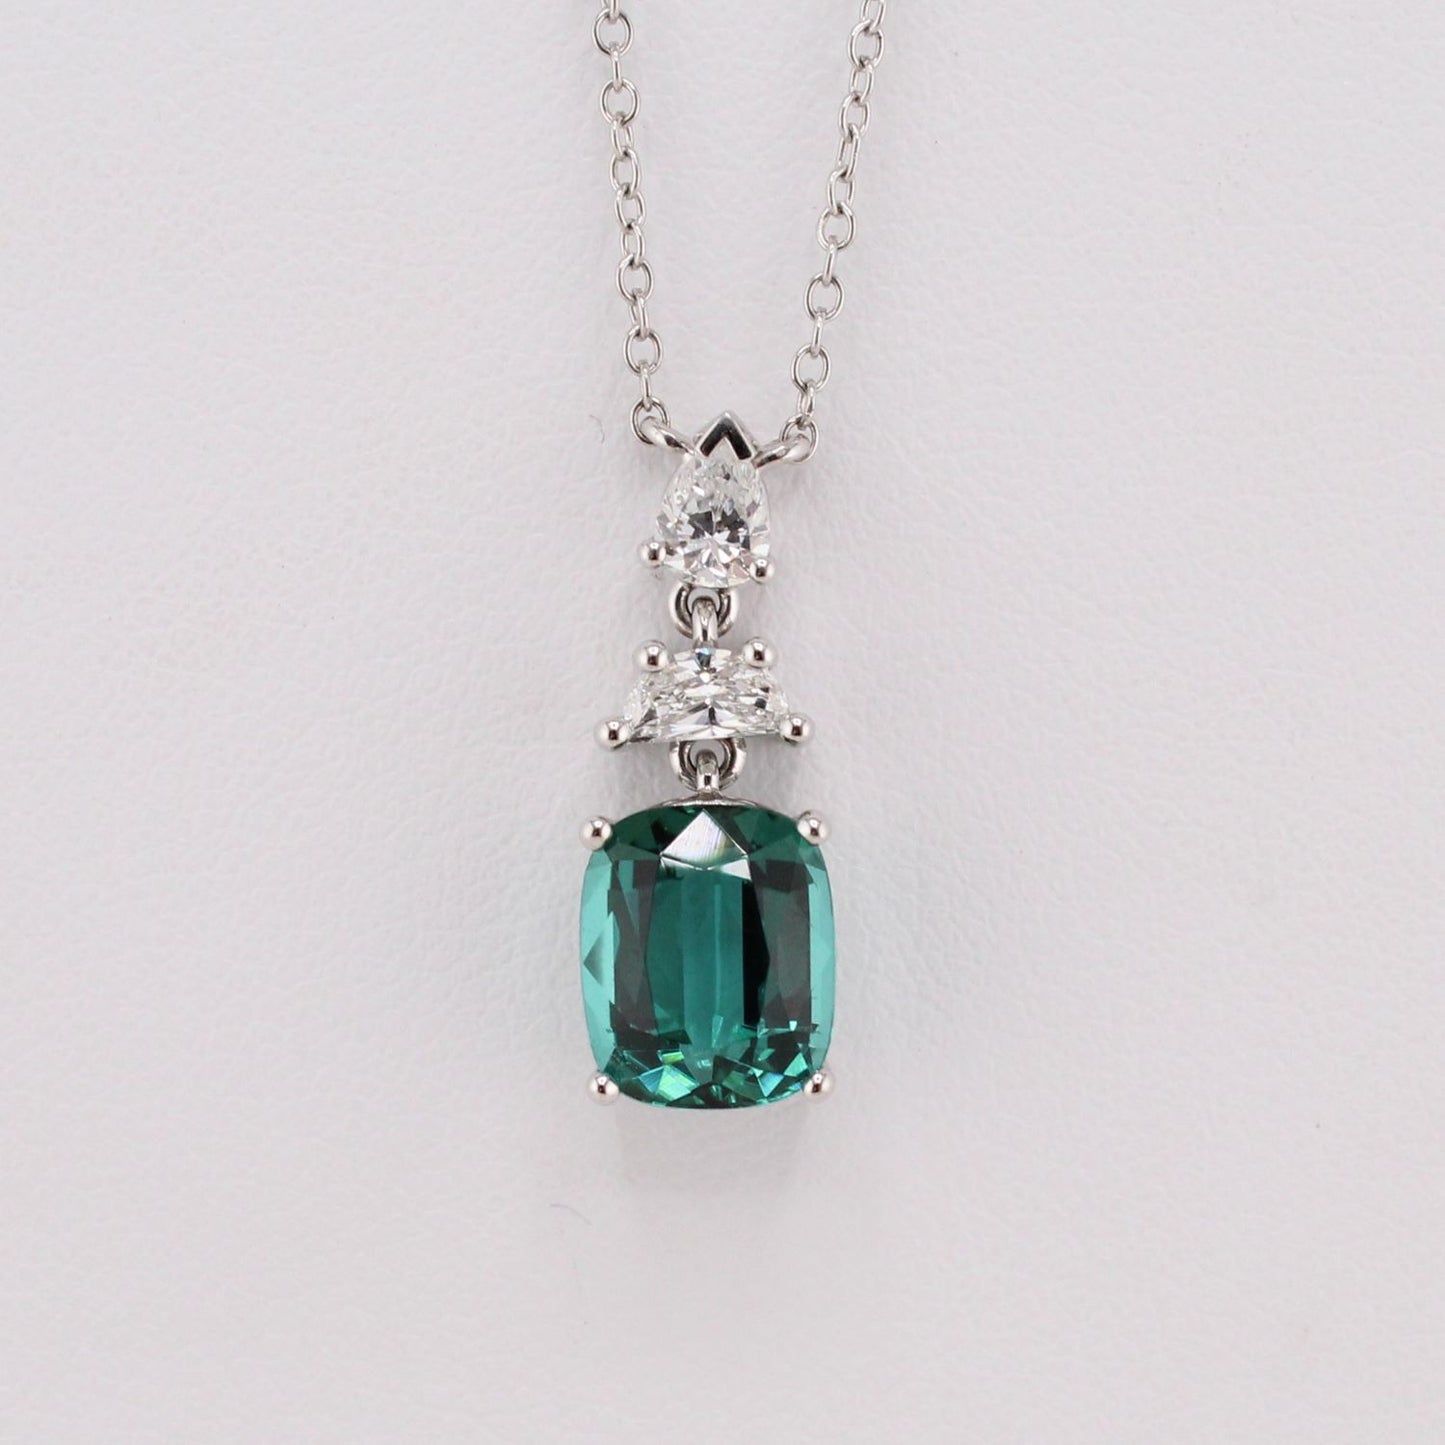 Green Tourmaline Pendant with Diamond Accents